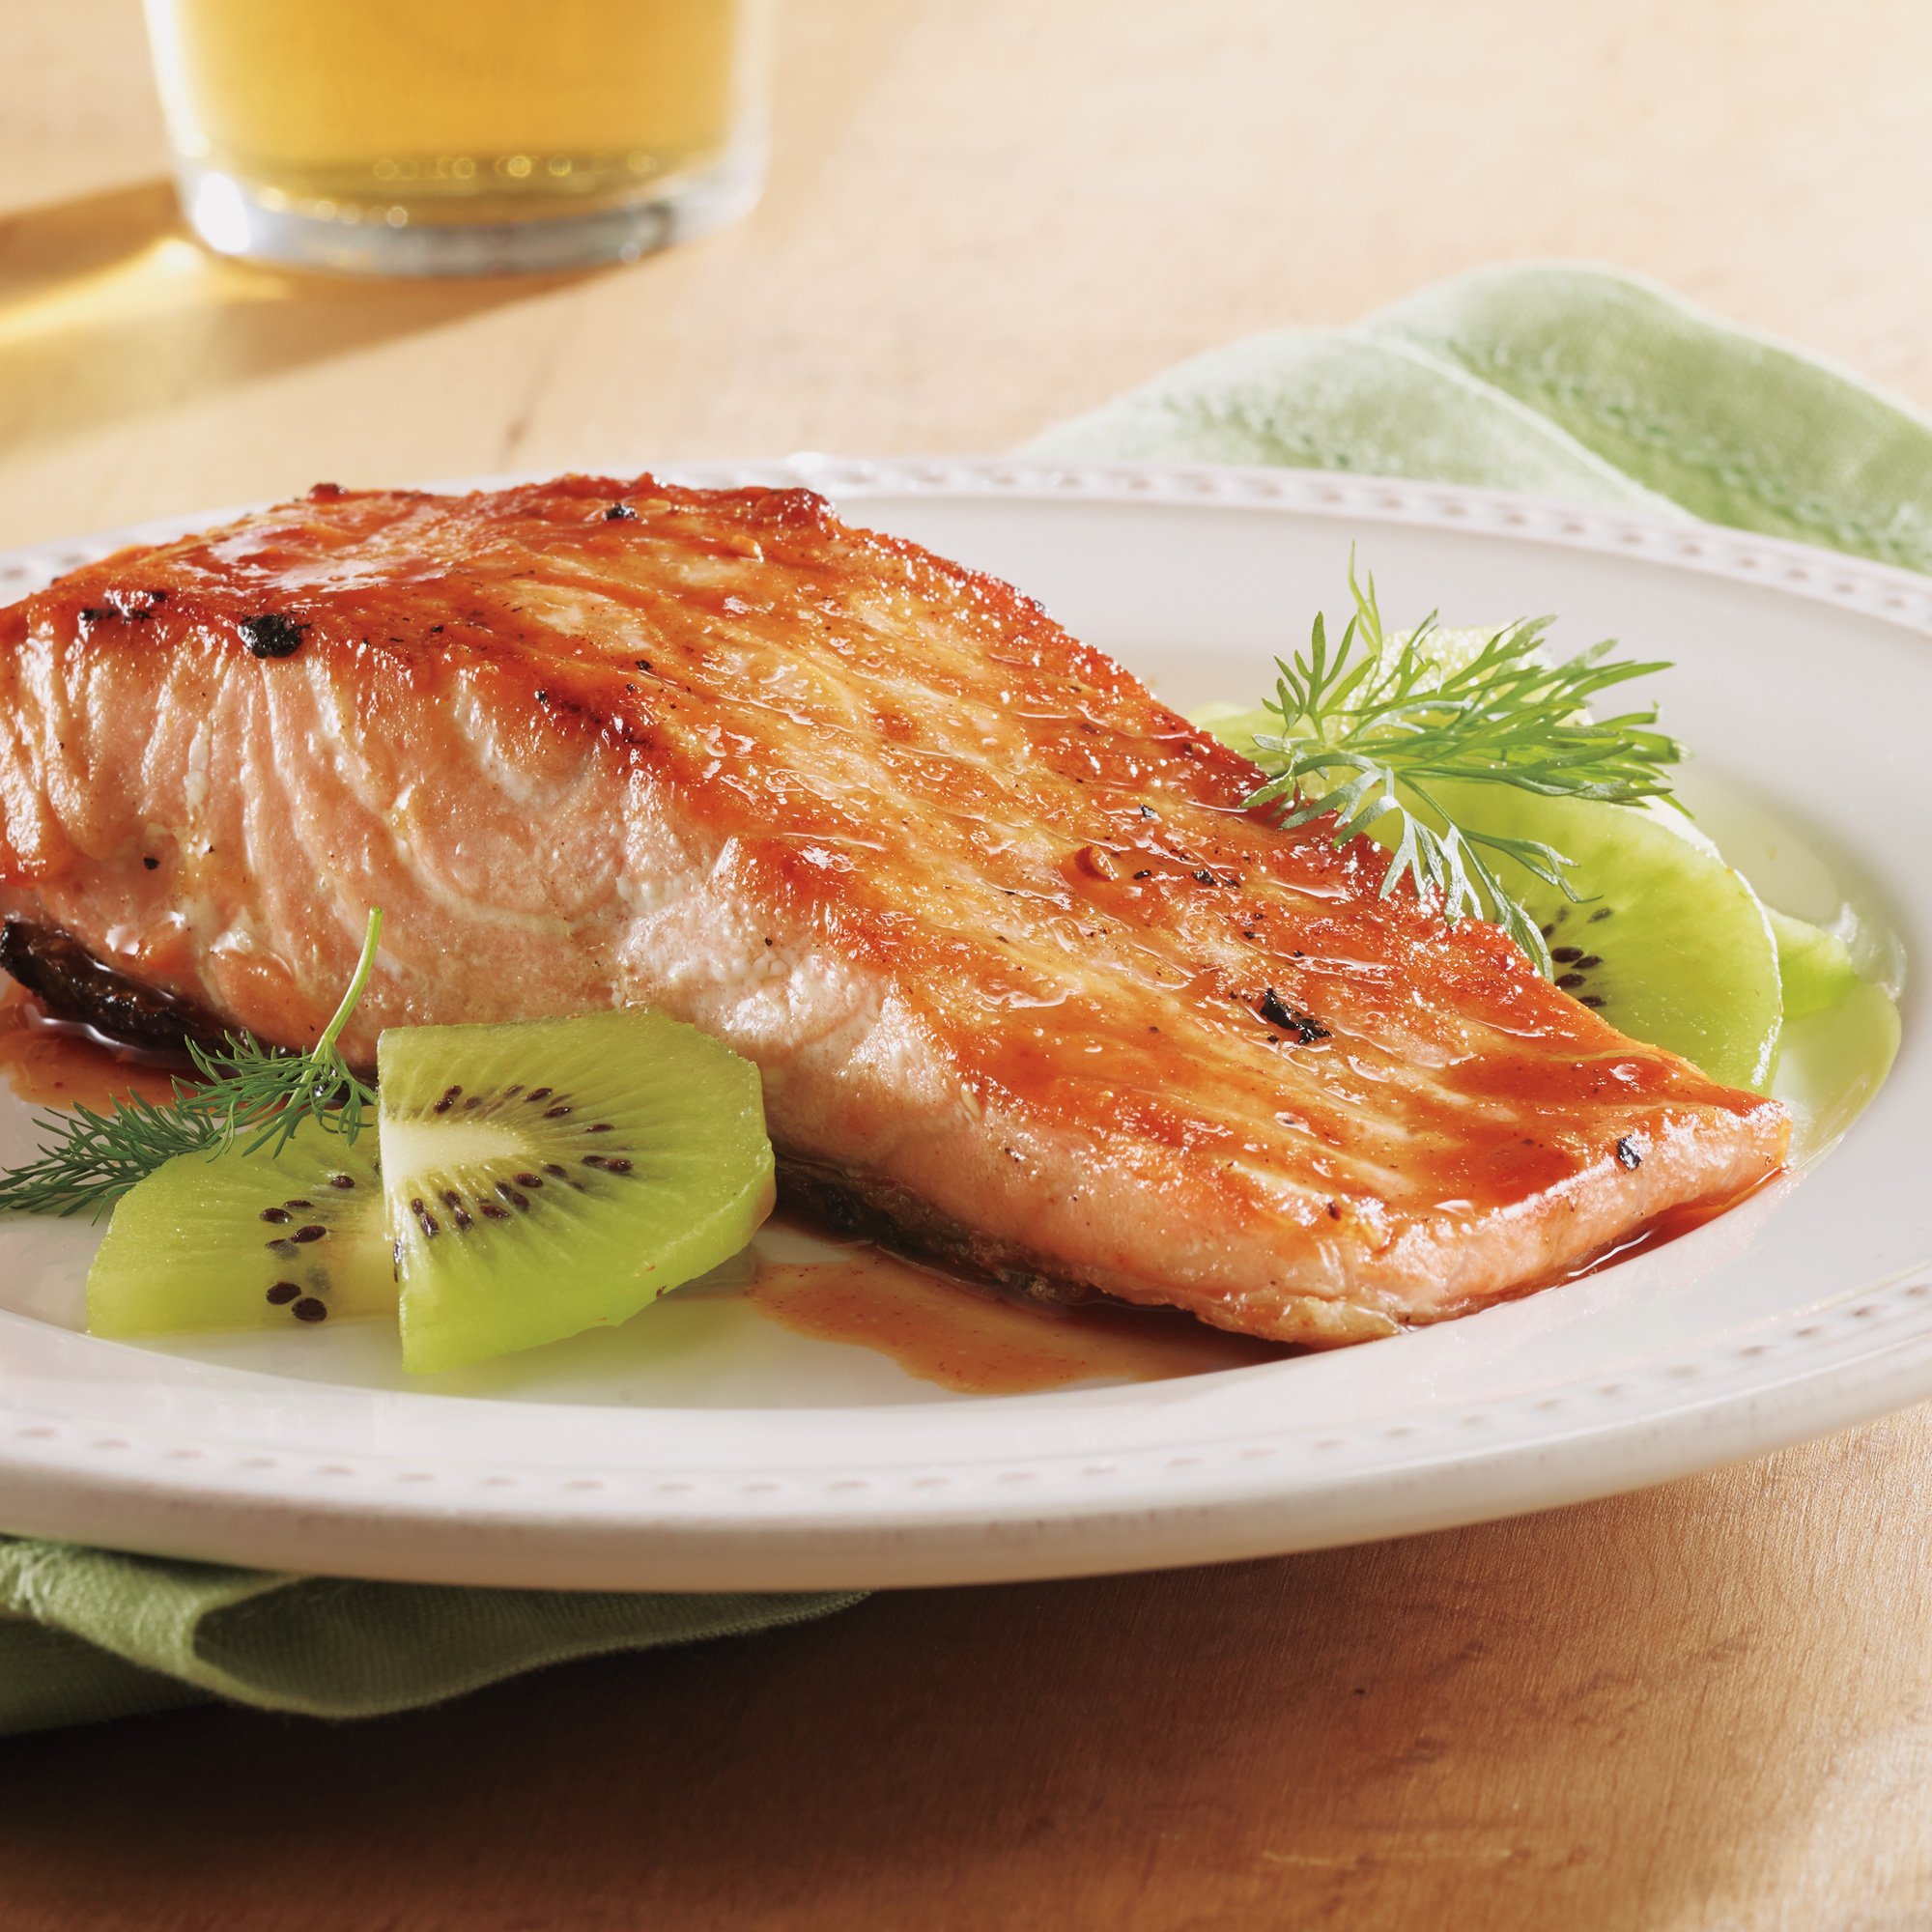 Captain's Barbecued Salmon Fillets Recipe from H-E-B